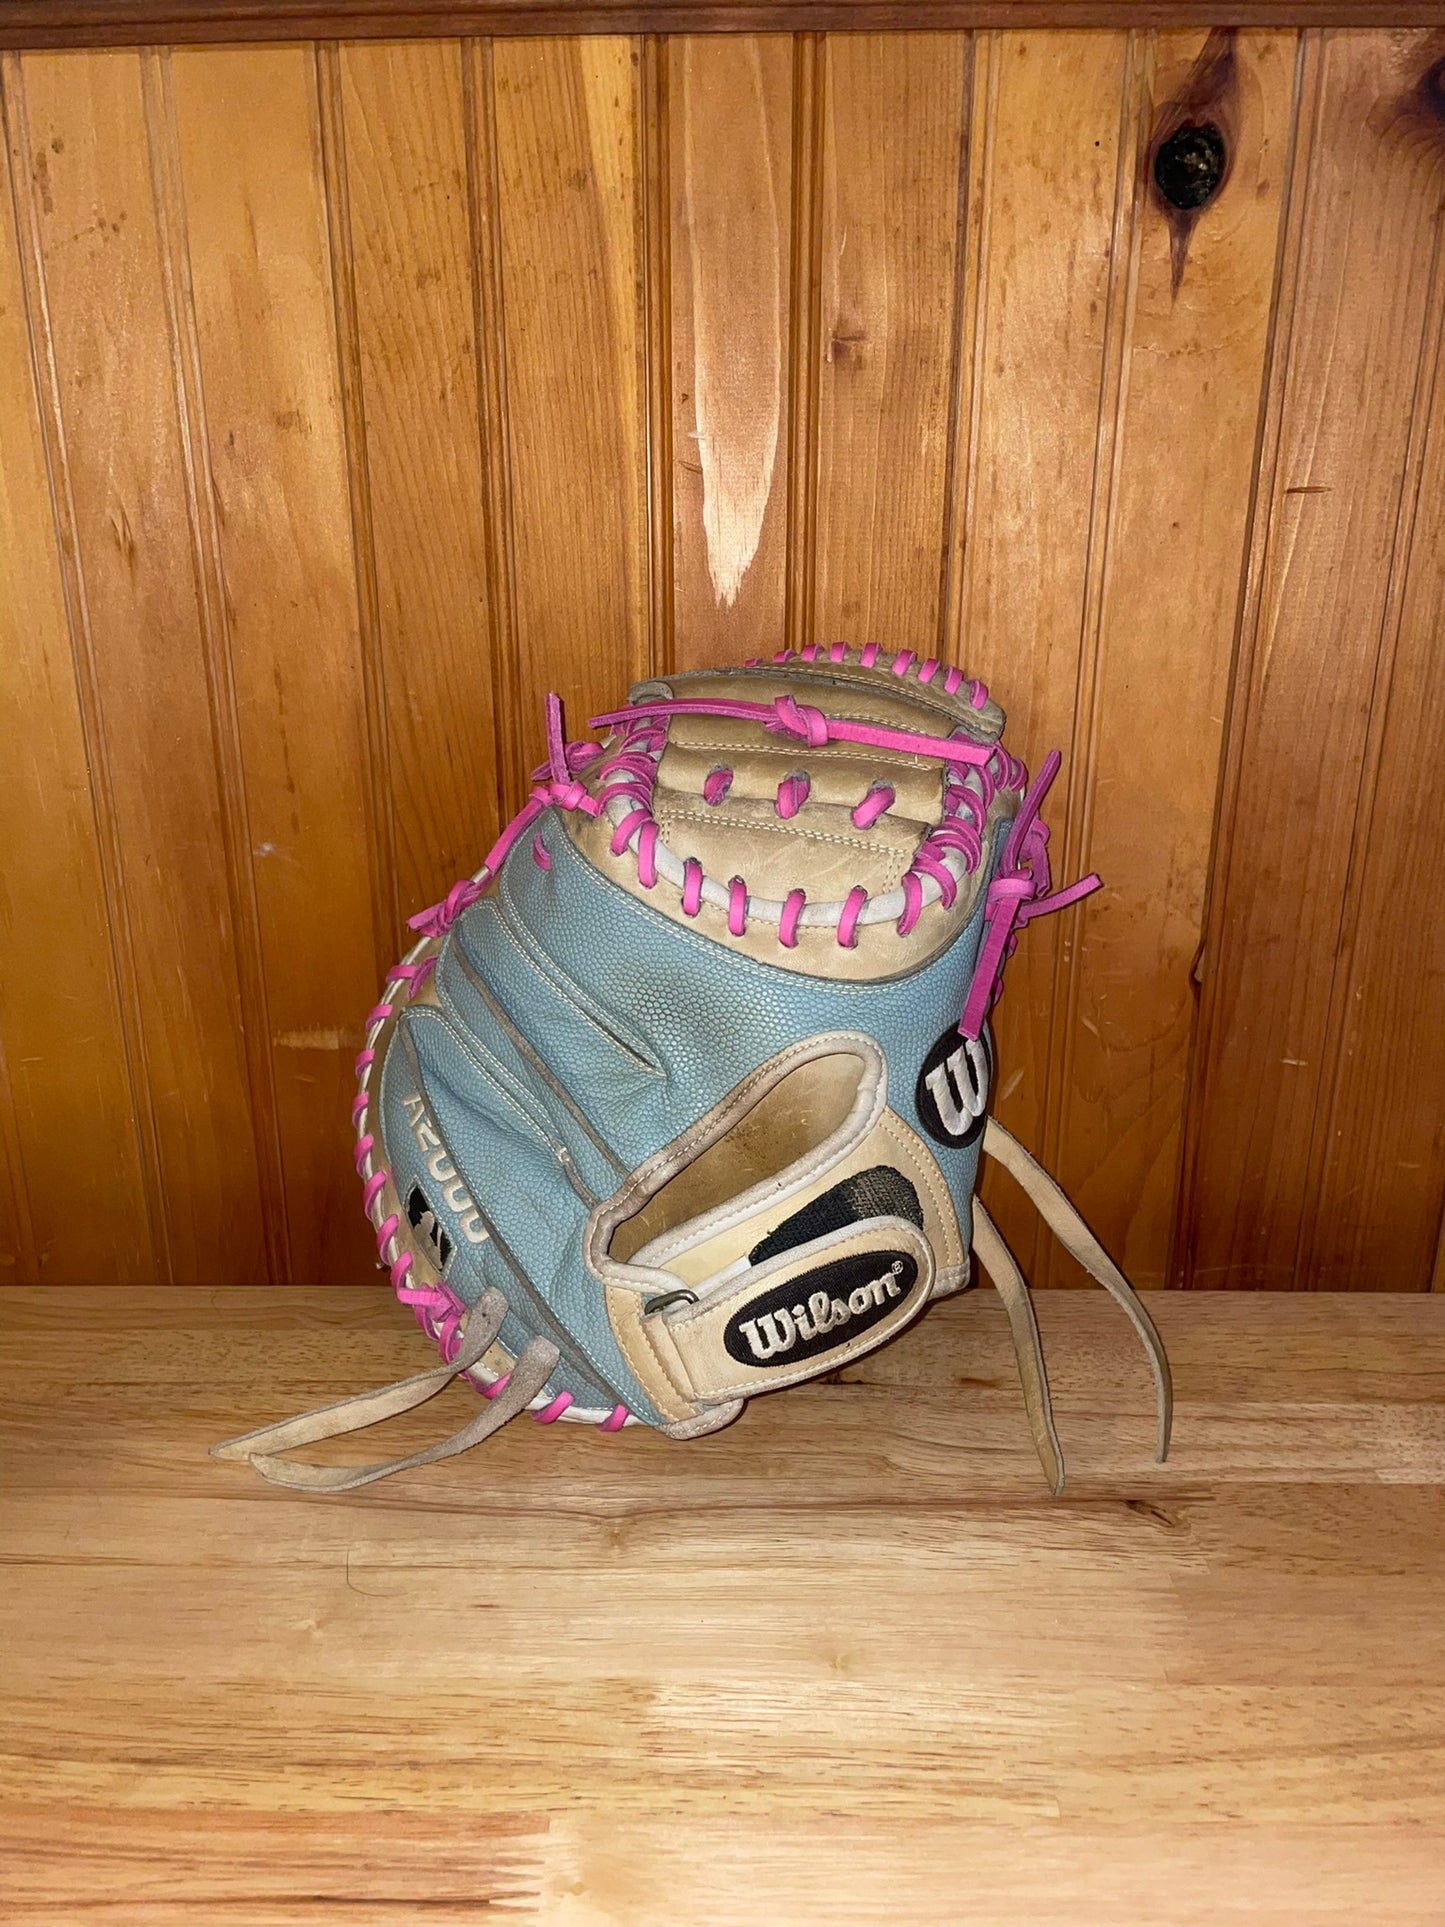 Full Baseball Glove Relace and Cleaning (Catchers and 1st Base)